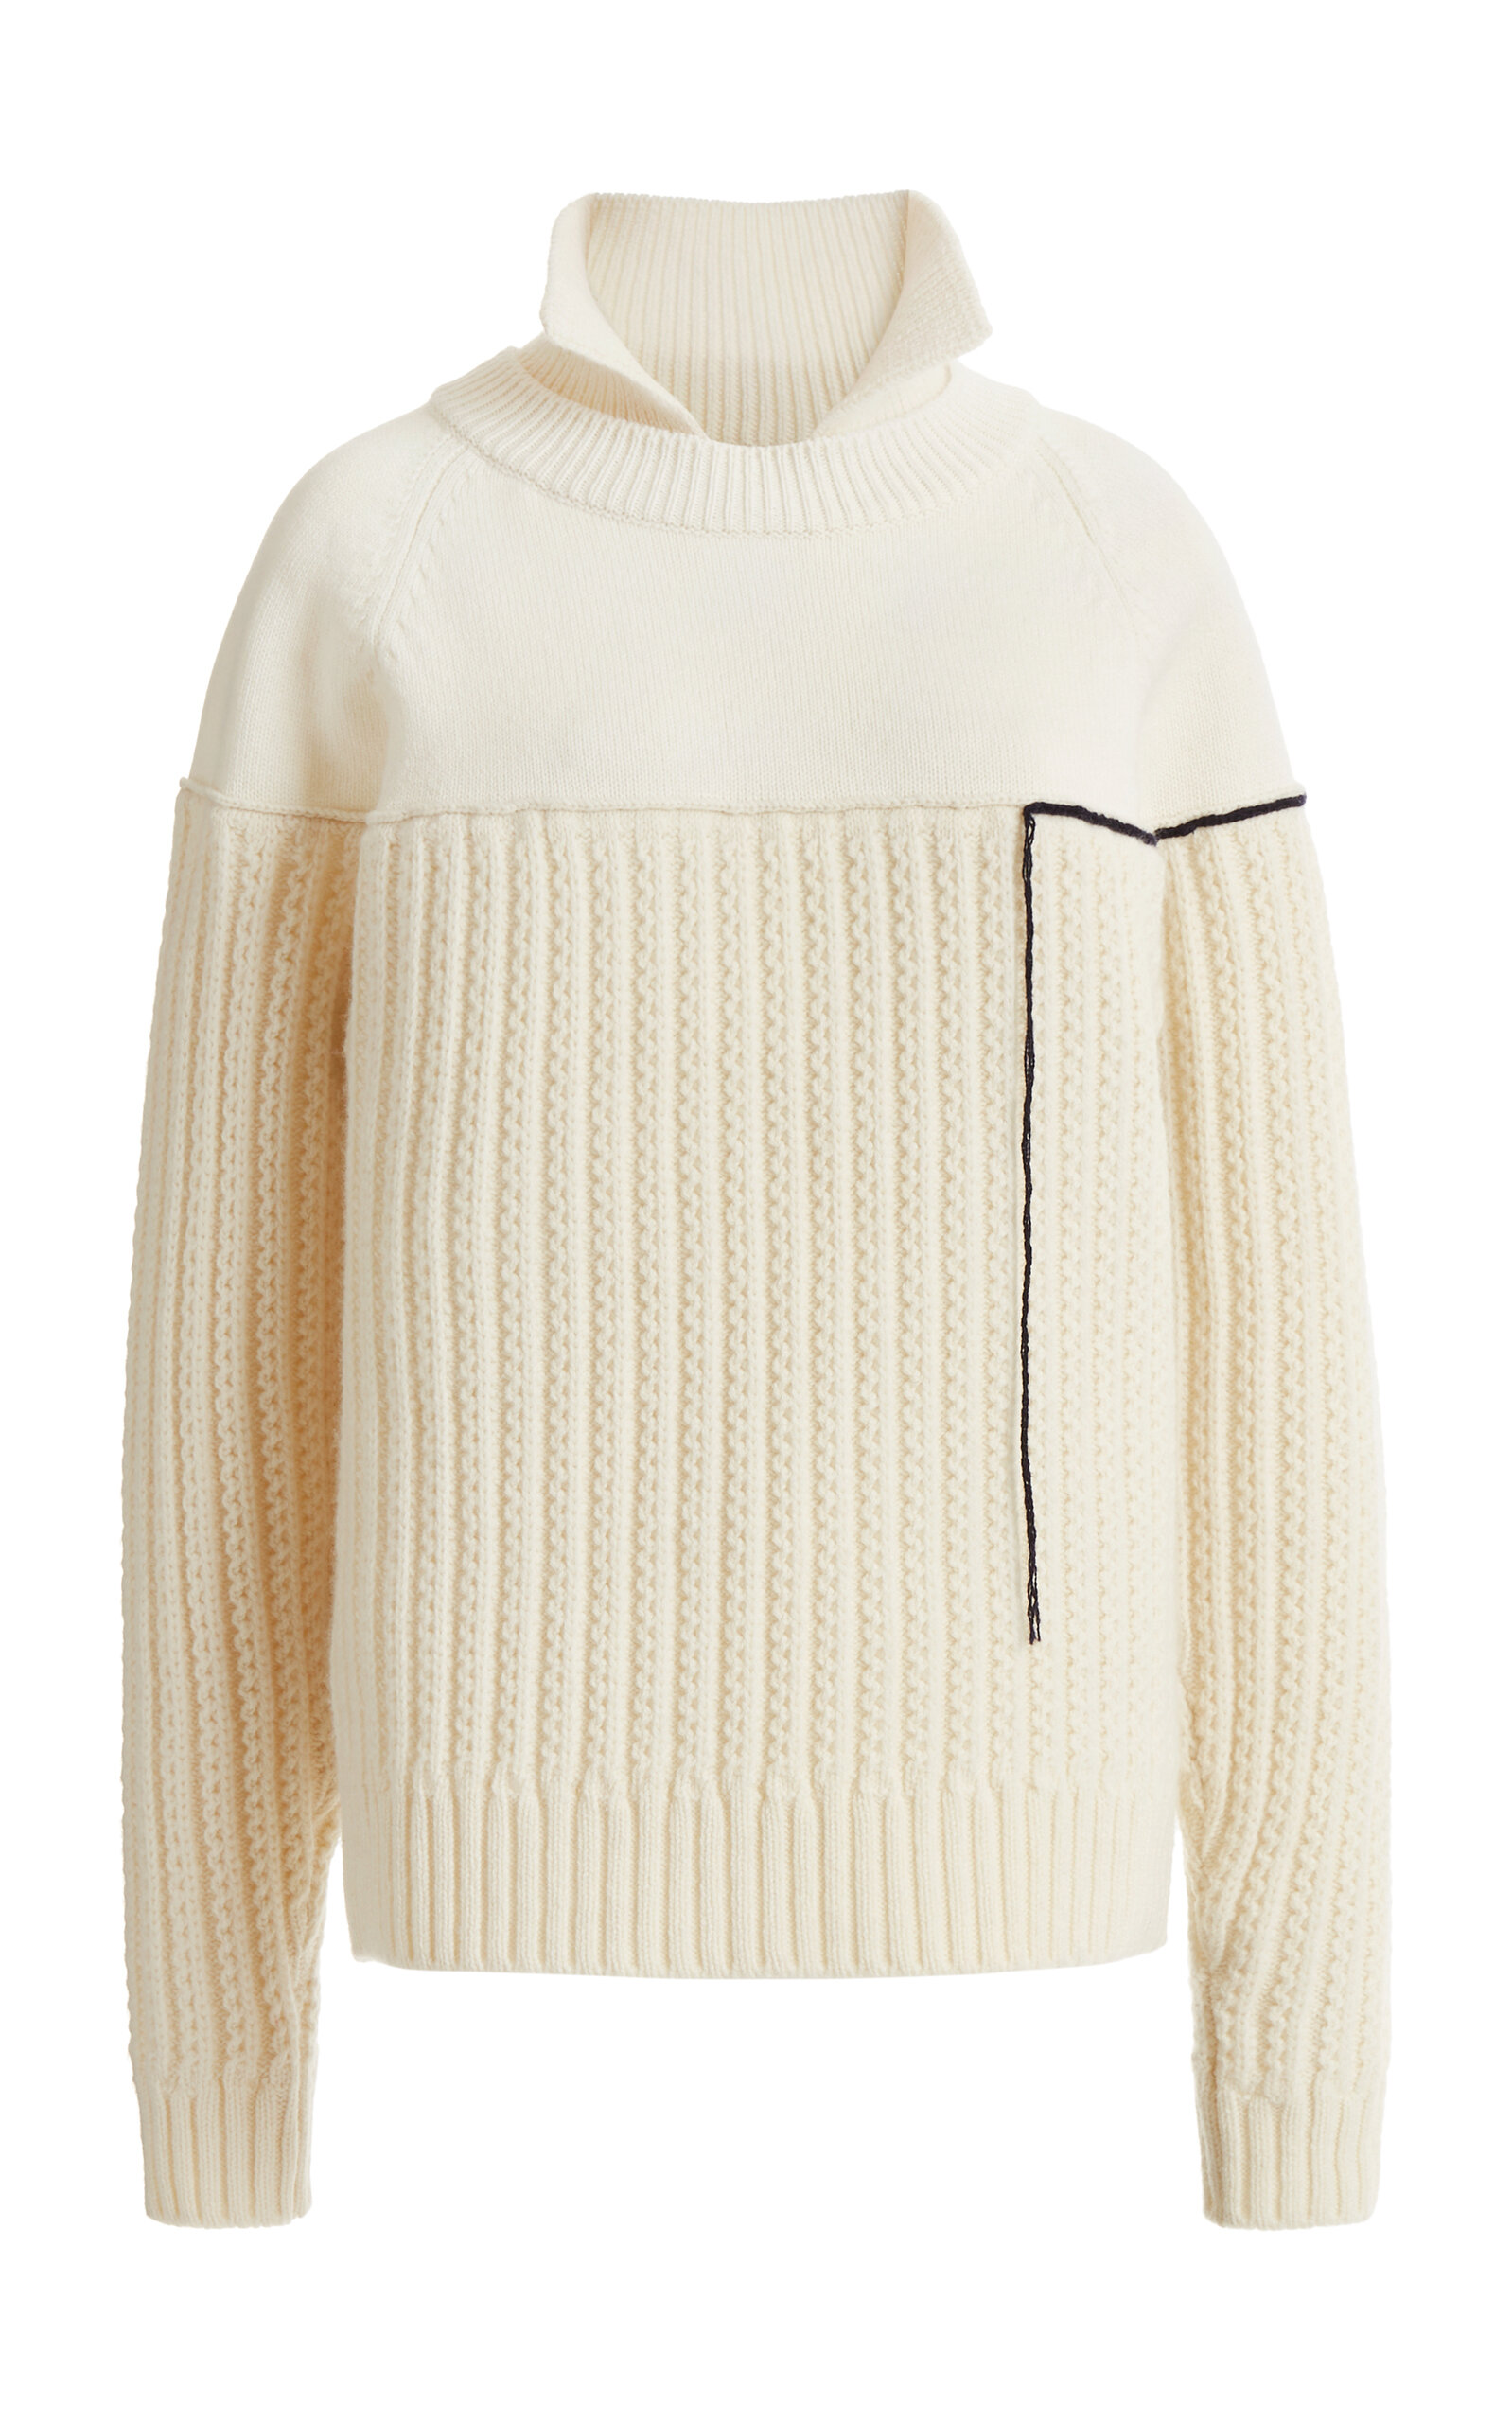 Victoria Beckham Collared Knit Wool Sweater In White